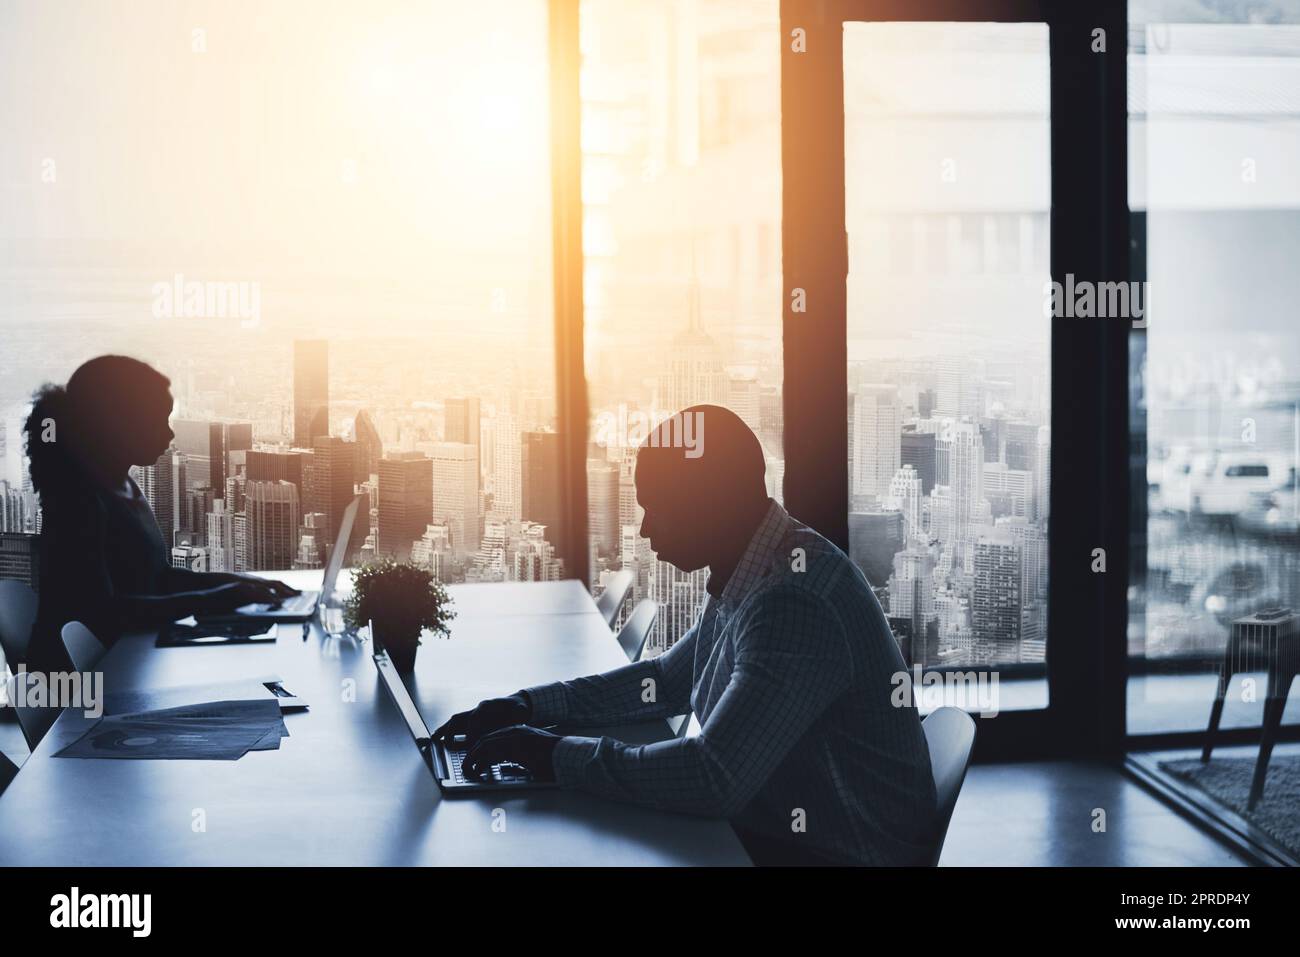 Silhouette, working and sitting in the city office to focus in the morning. Business, people and typing at the boardroom table at a calm time of day. Cityscape, window and flare view of urban life. Stock Photo